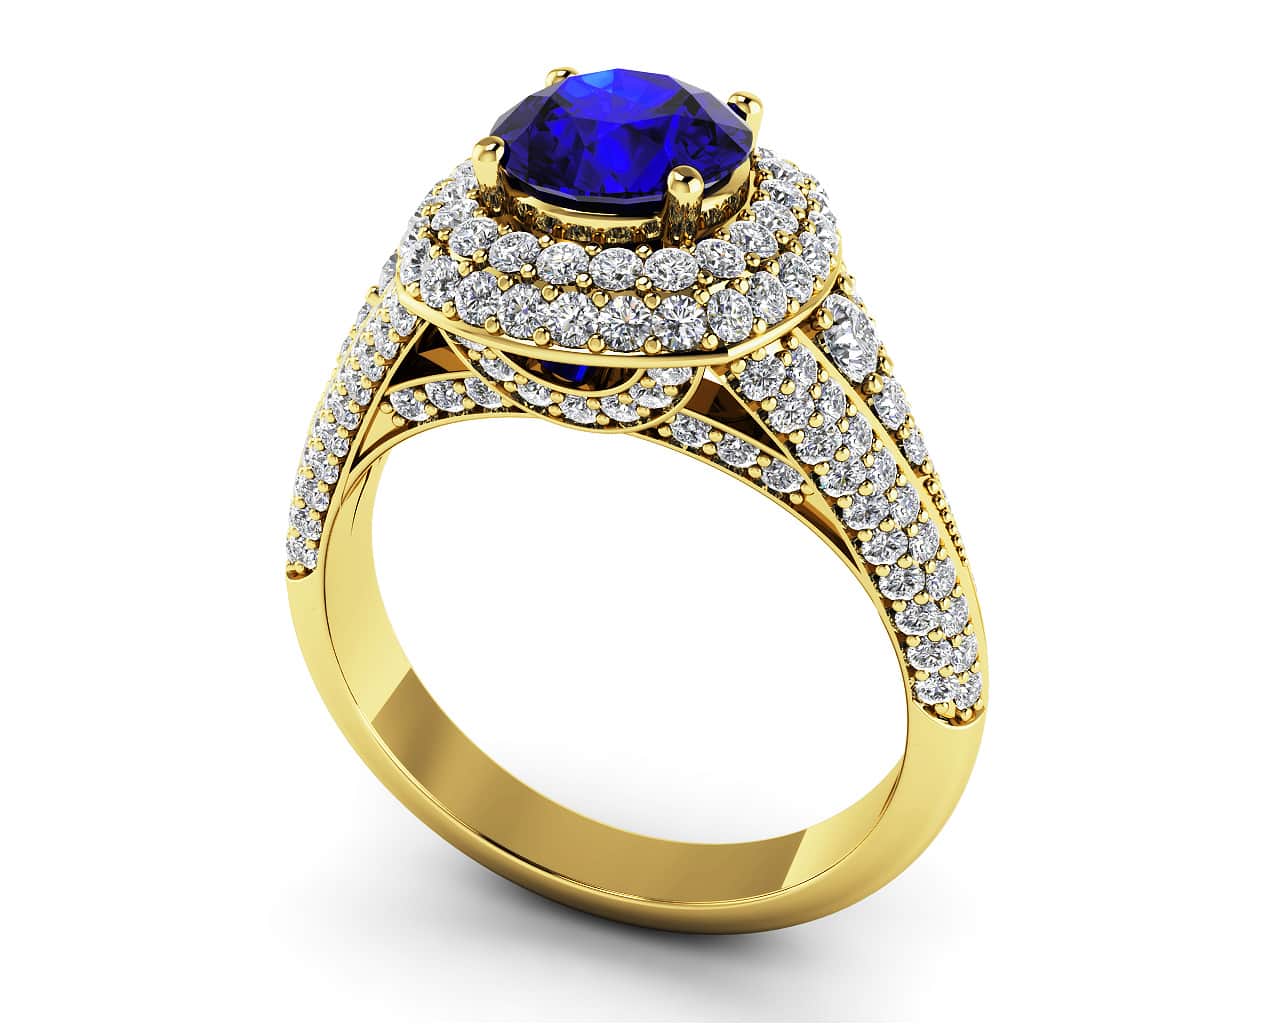 Double Halo Diamonds And Gem Anniversary Ring In Gold Or Platinum